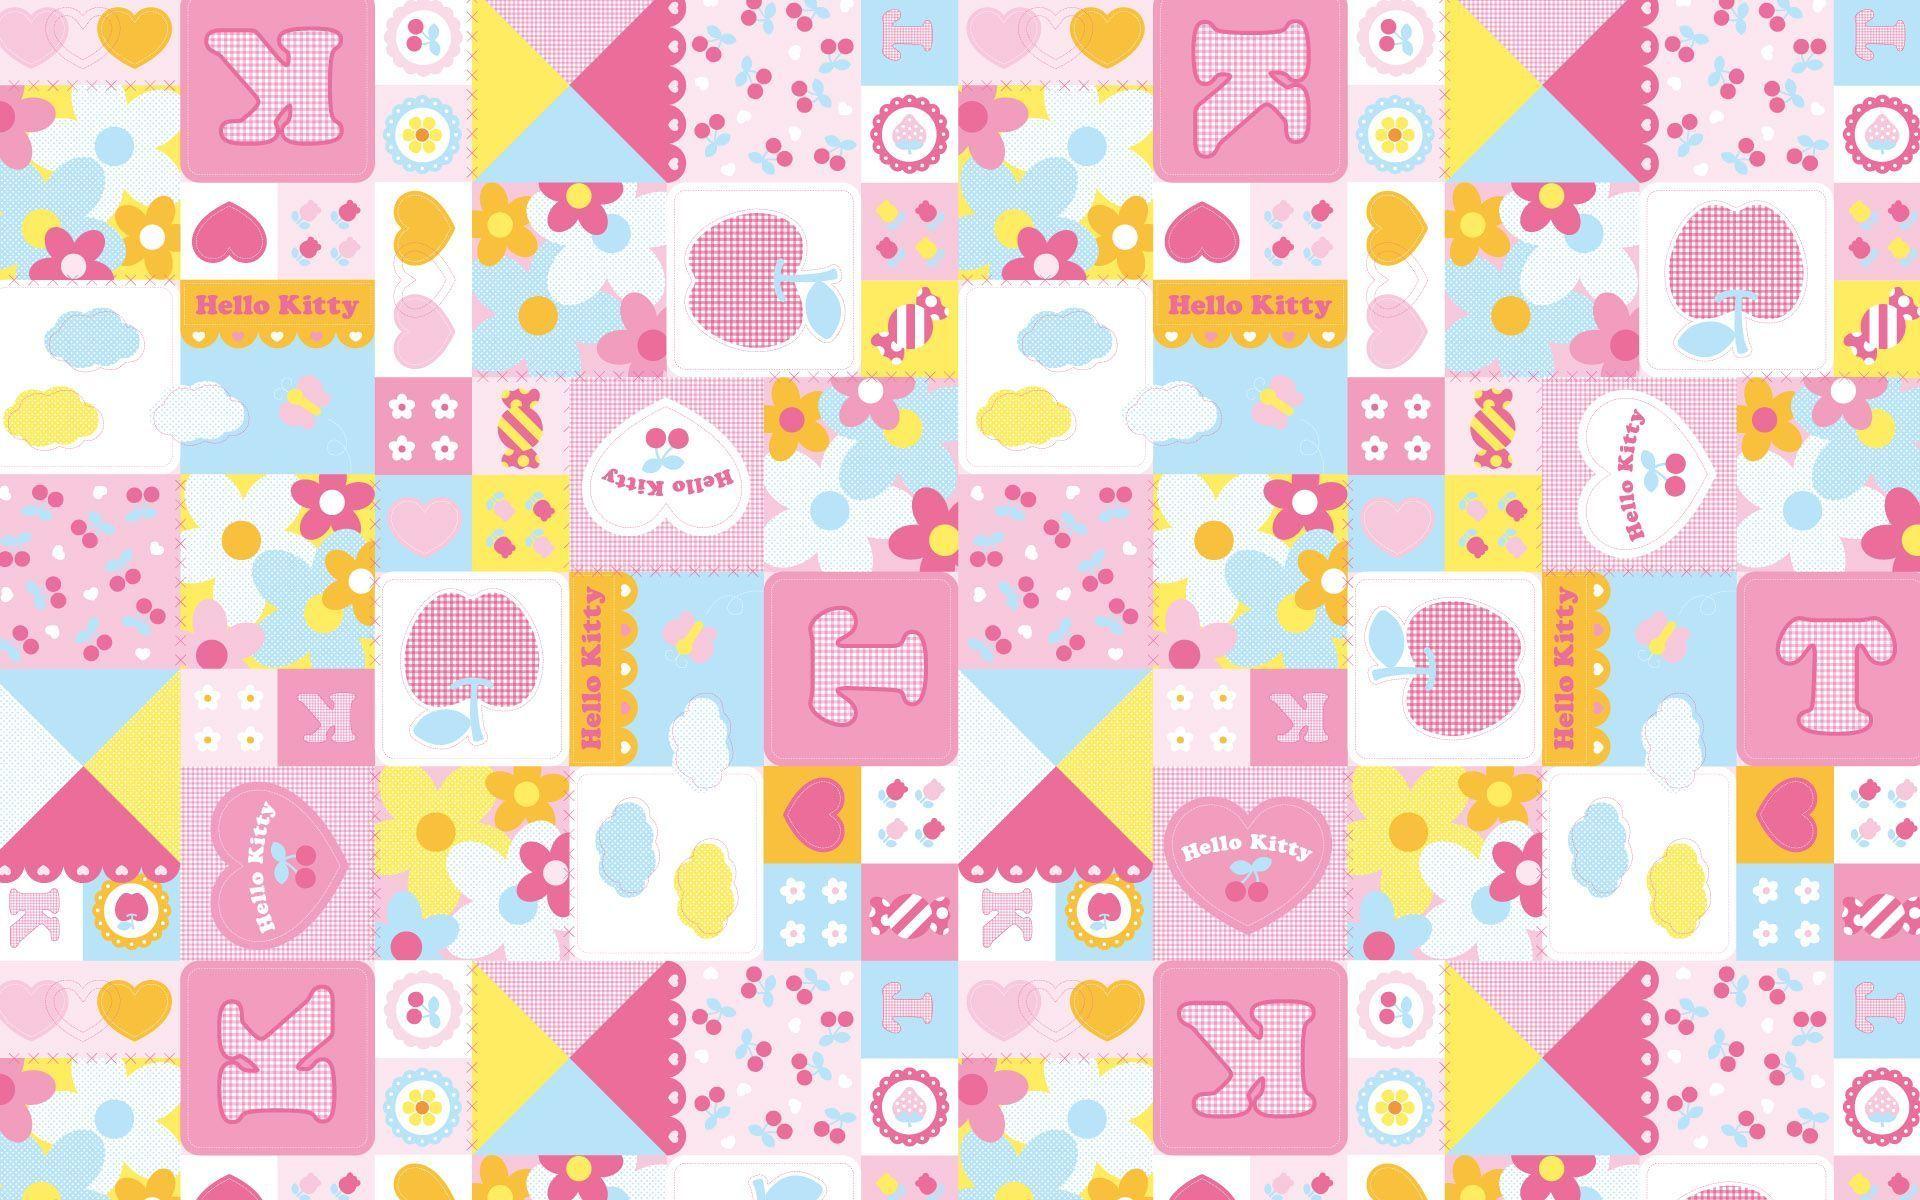 hello kitty widescreen wallpaper 9 - Image And Wallpaper